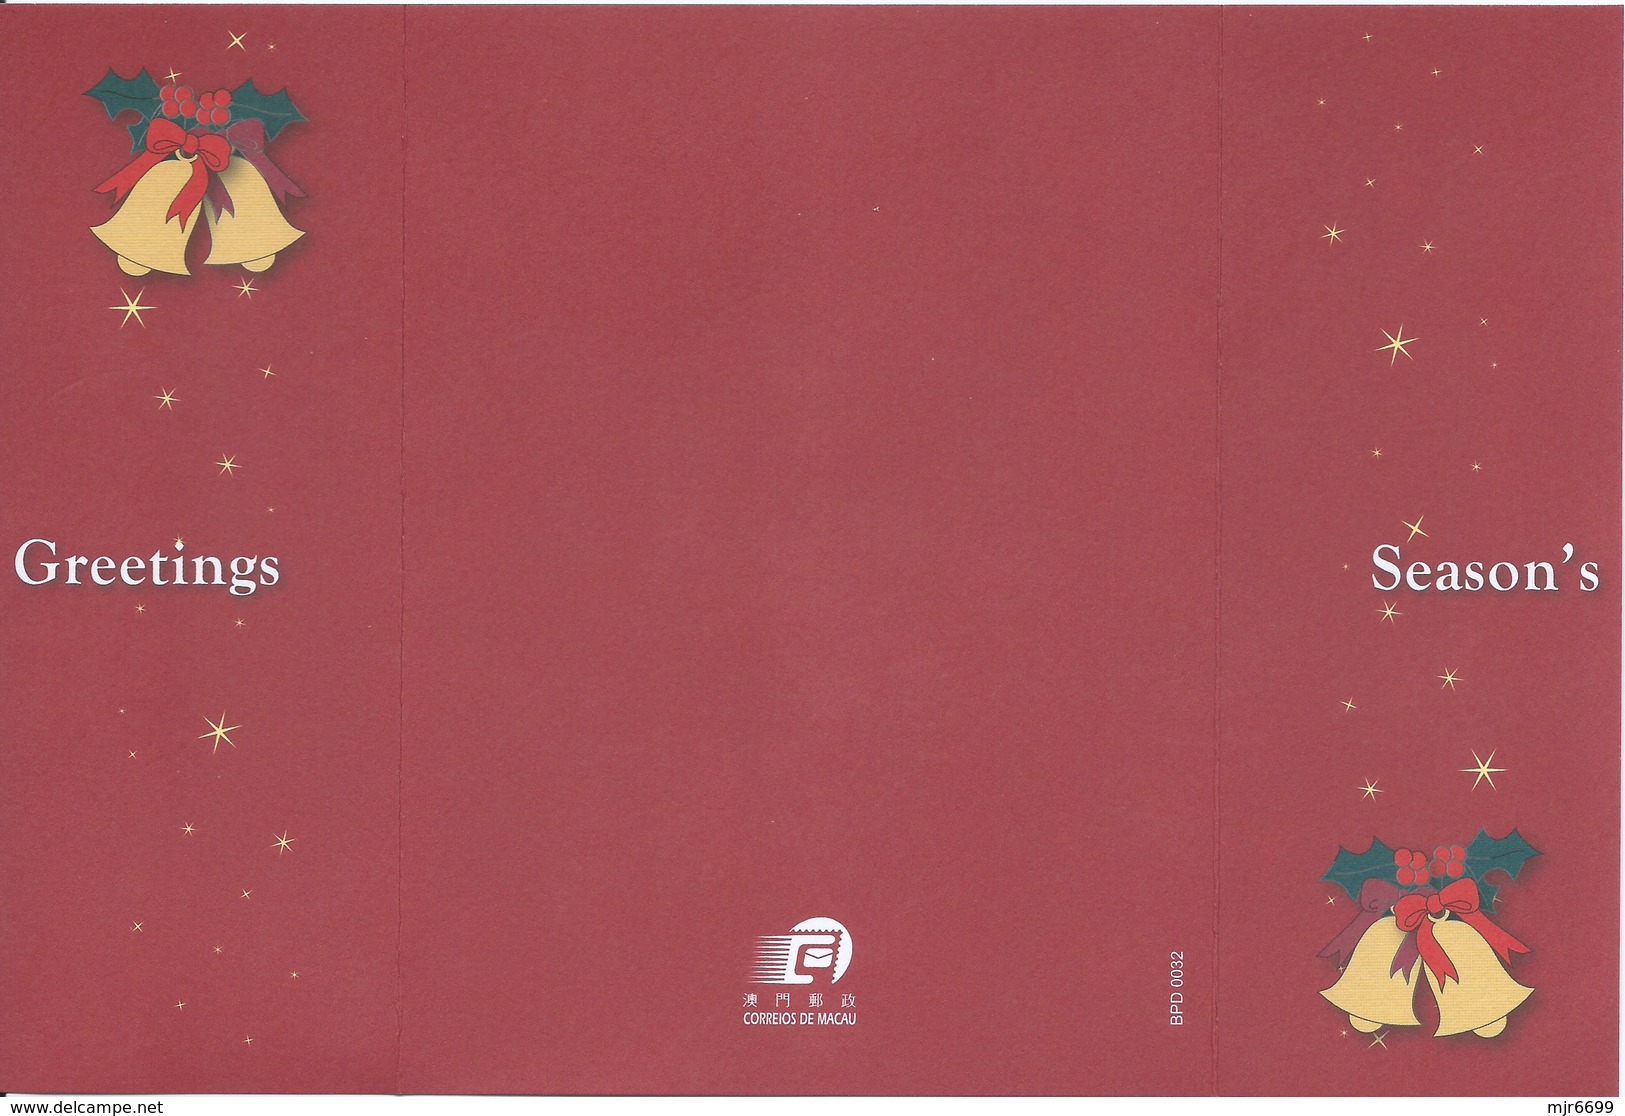 MACAU 2009 CHRISTMAS GREETING CARD & POSTAGE PAID COVER FIRST DAY USAGE WITH TERMINAL POST CDS - Postal Stationery